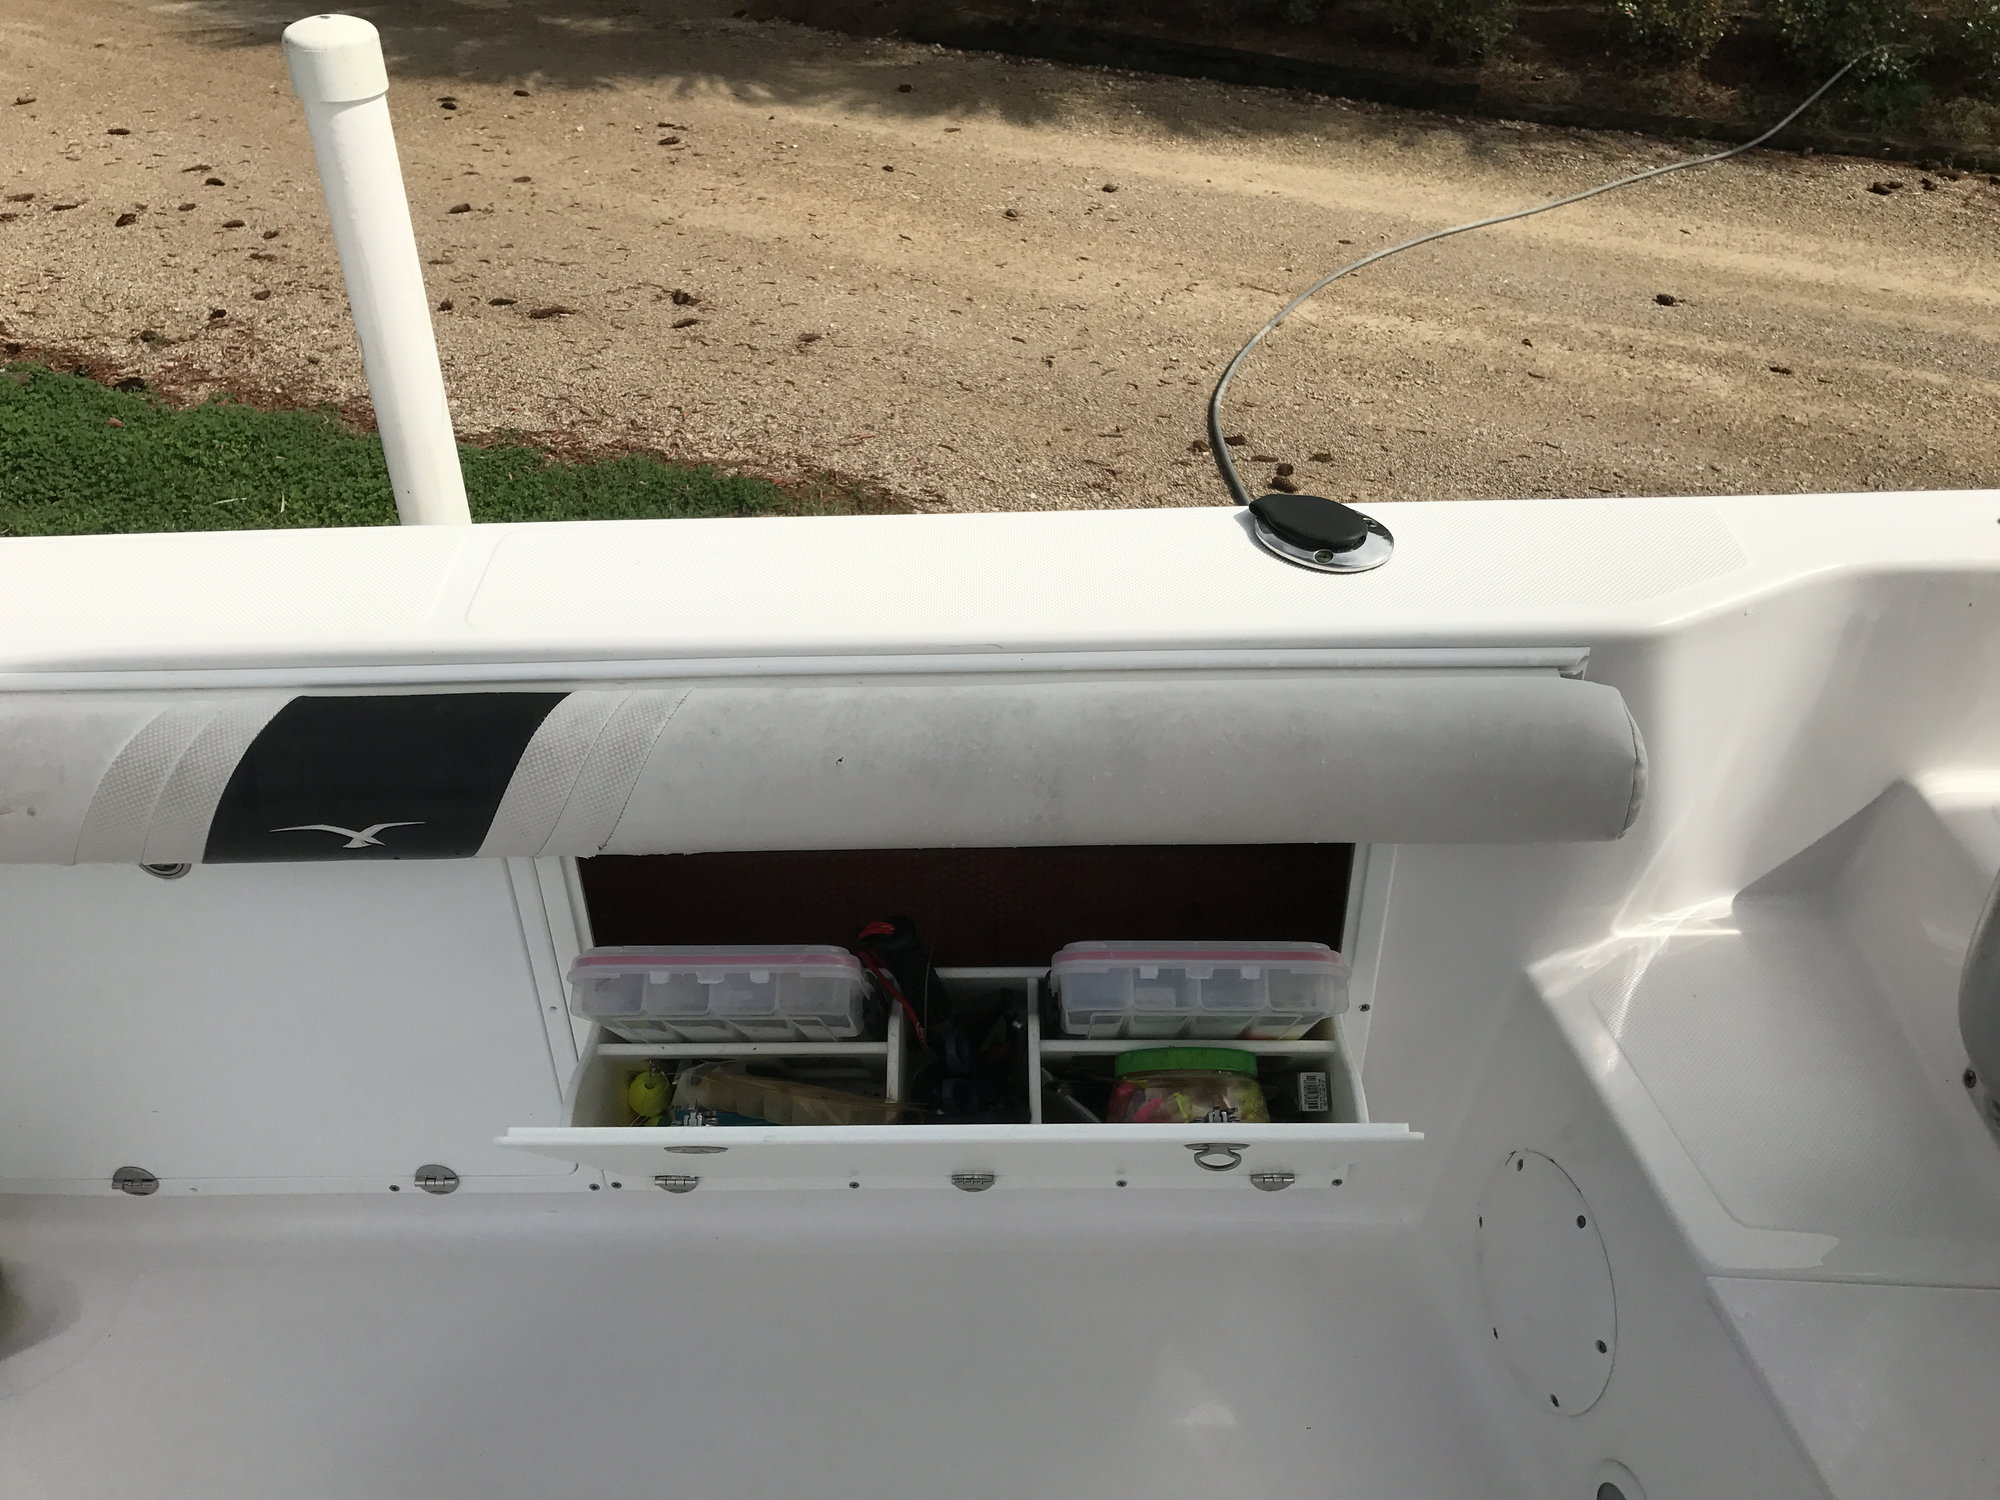 Let's see your tackle storage ideas under your flip up leaning post seat. -  The Hull Truth - Boating and Fishing Forum